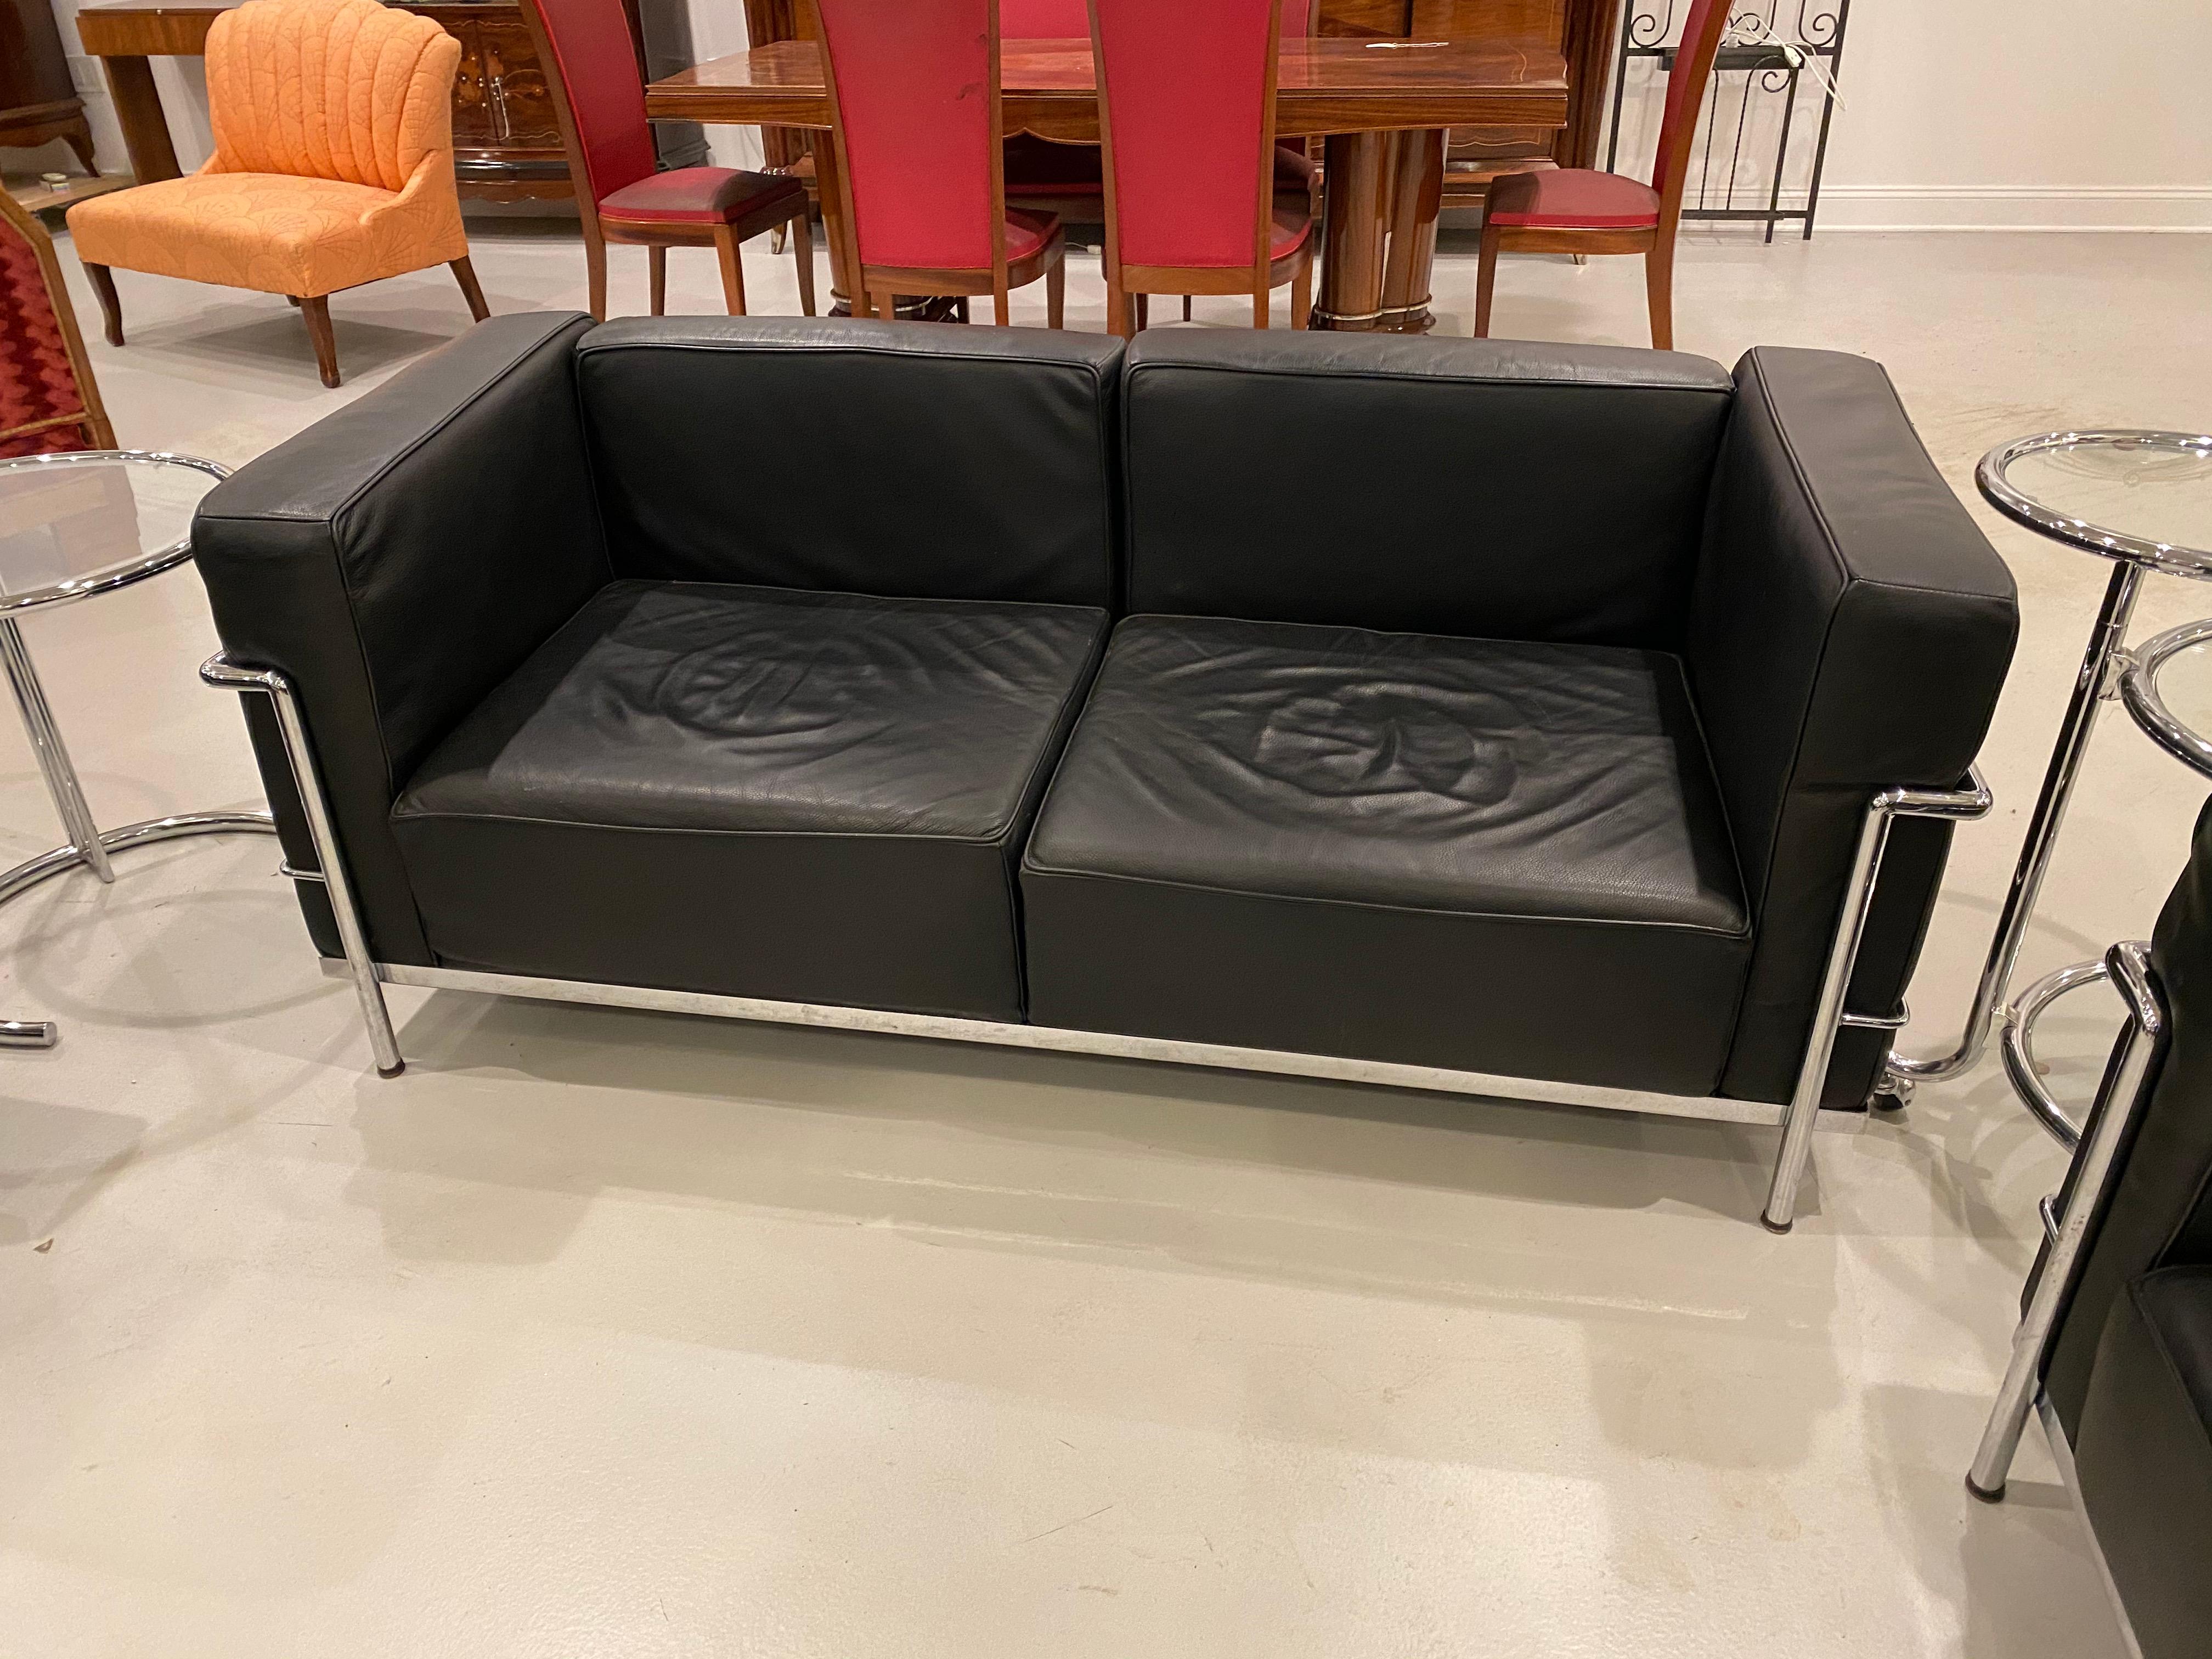 Beautiful and stylish chrome and black leather couch in the style of Le Corbusier.